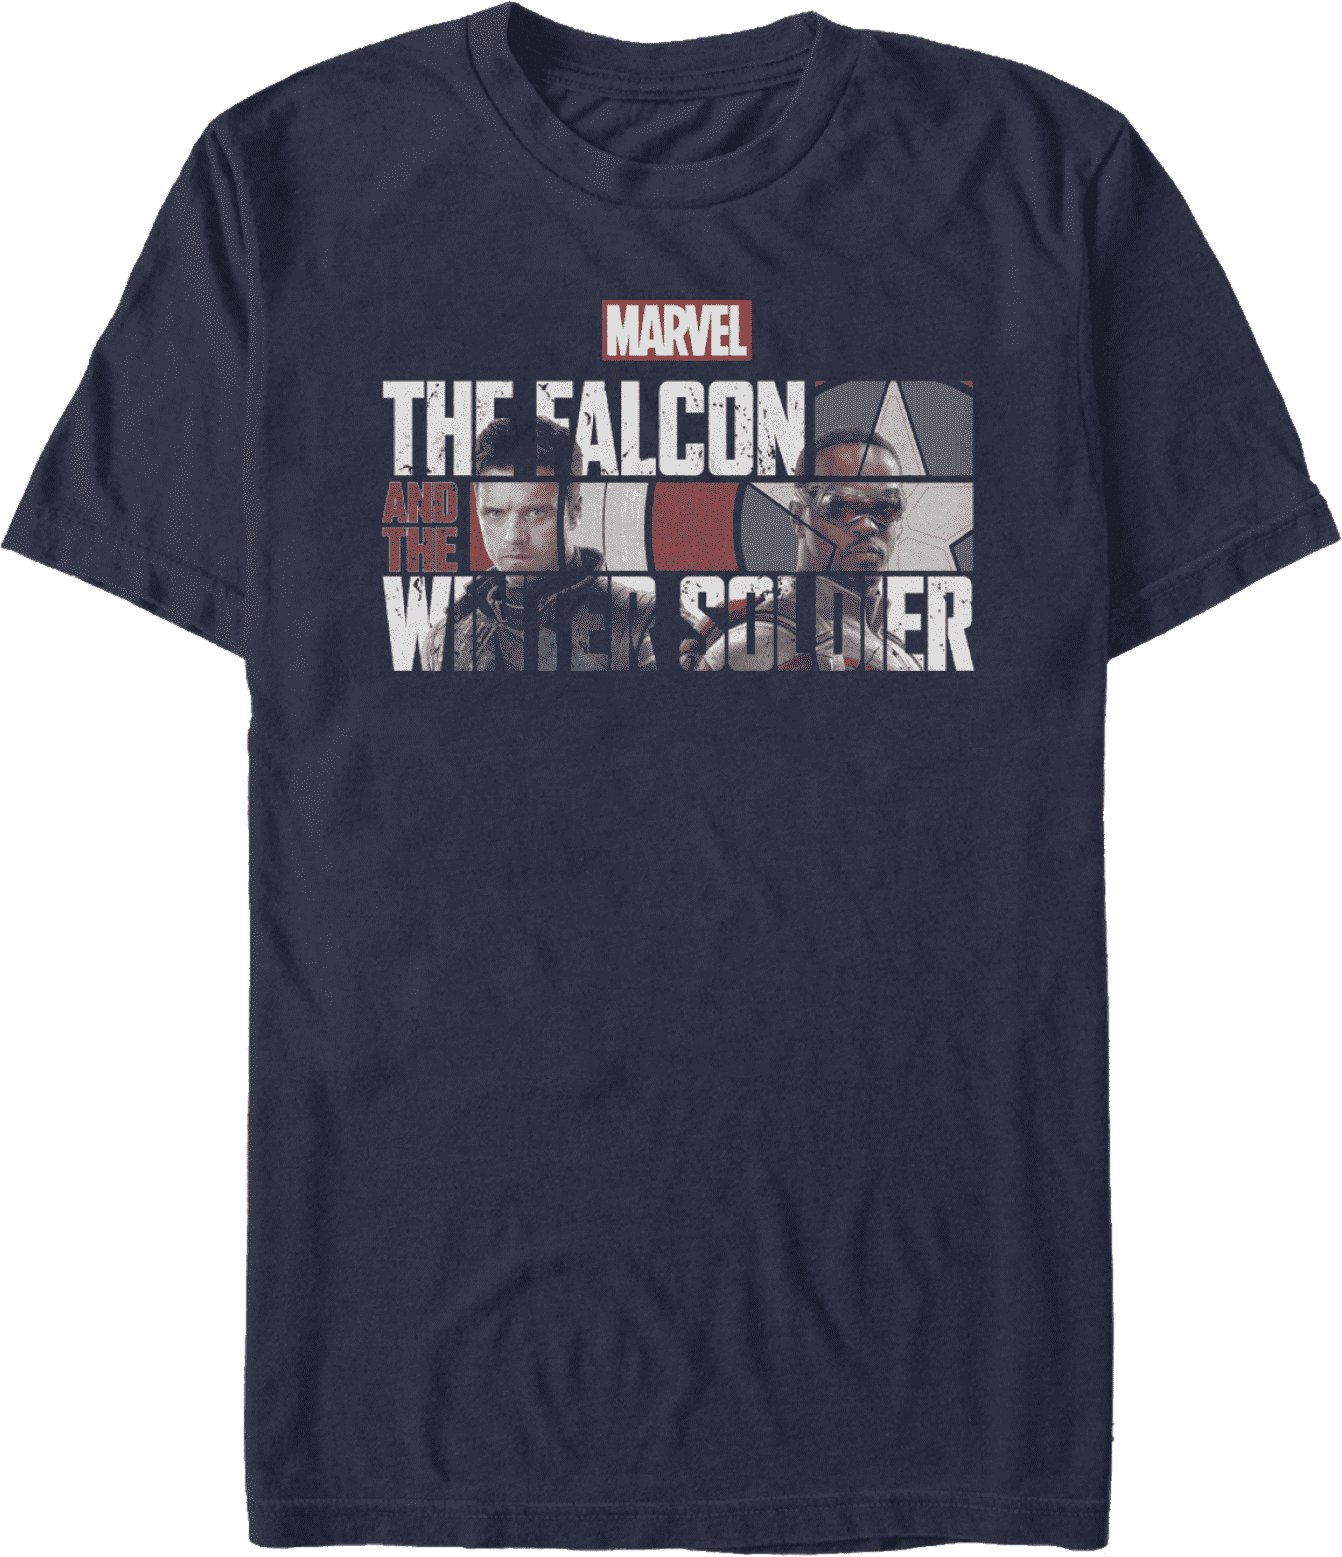 Merchandise The Falcon and the Winter Soldier - cinematographe.it